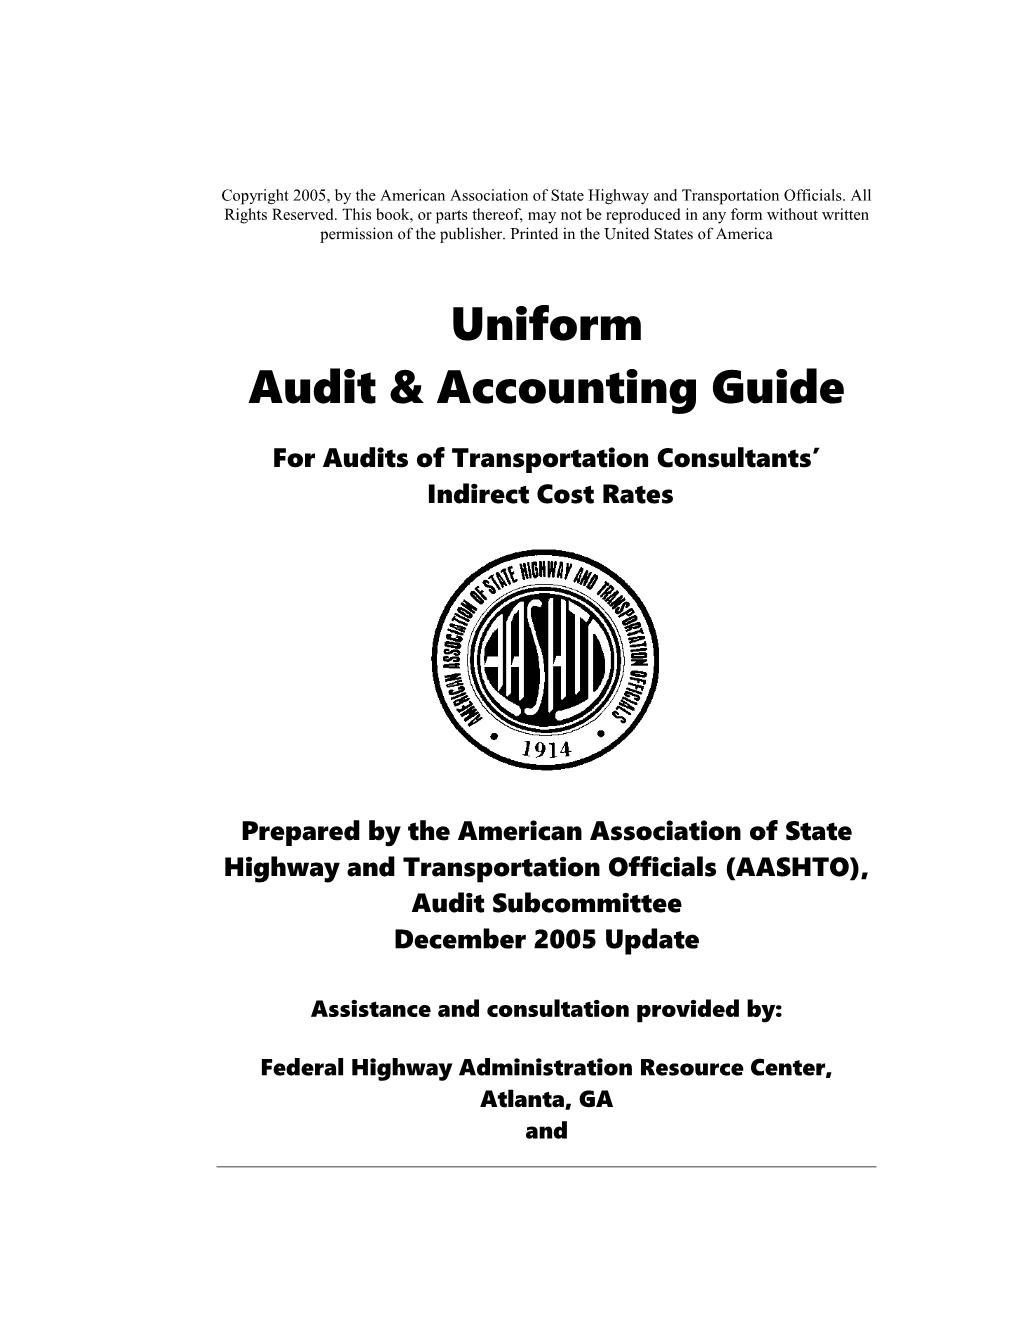 For Audits of Transportation Consultants